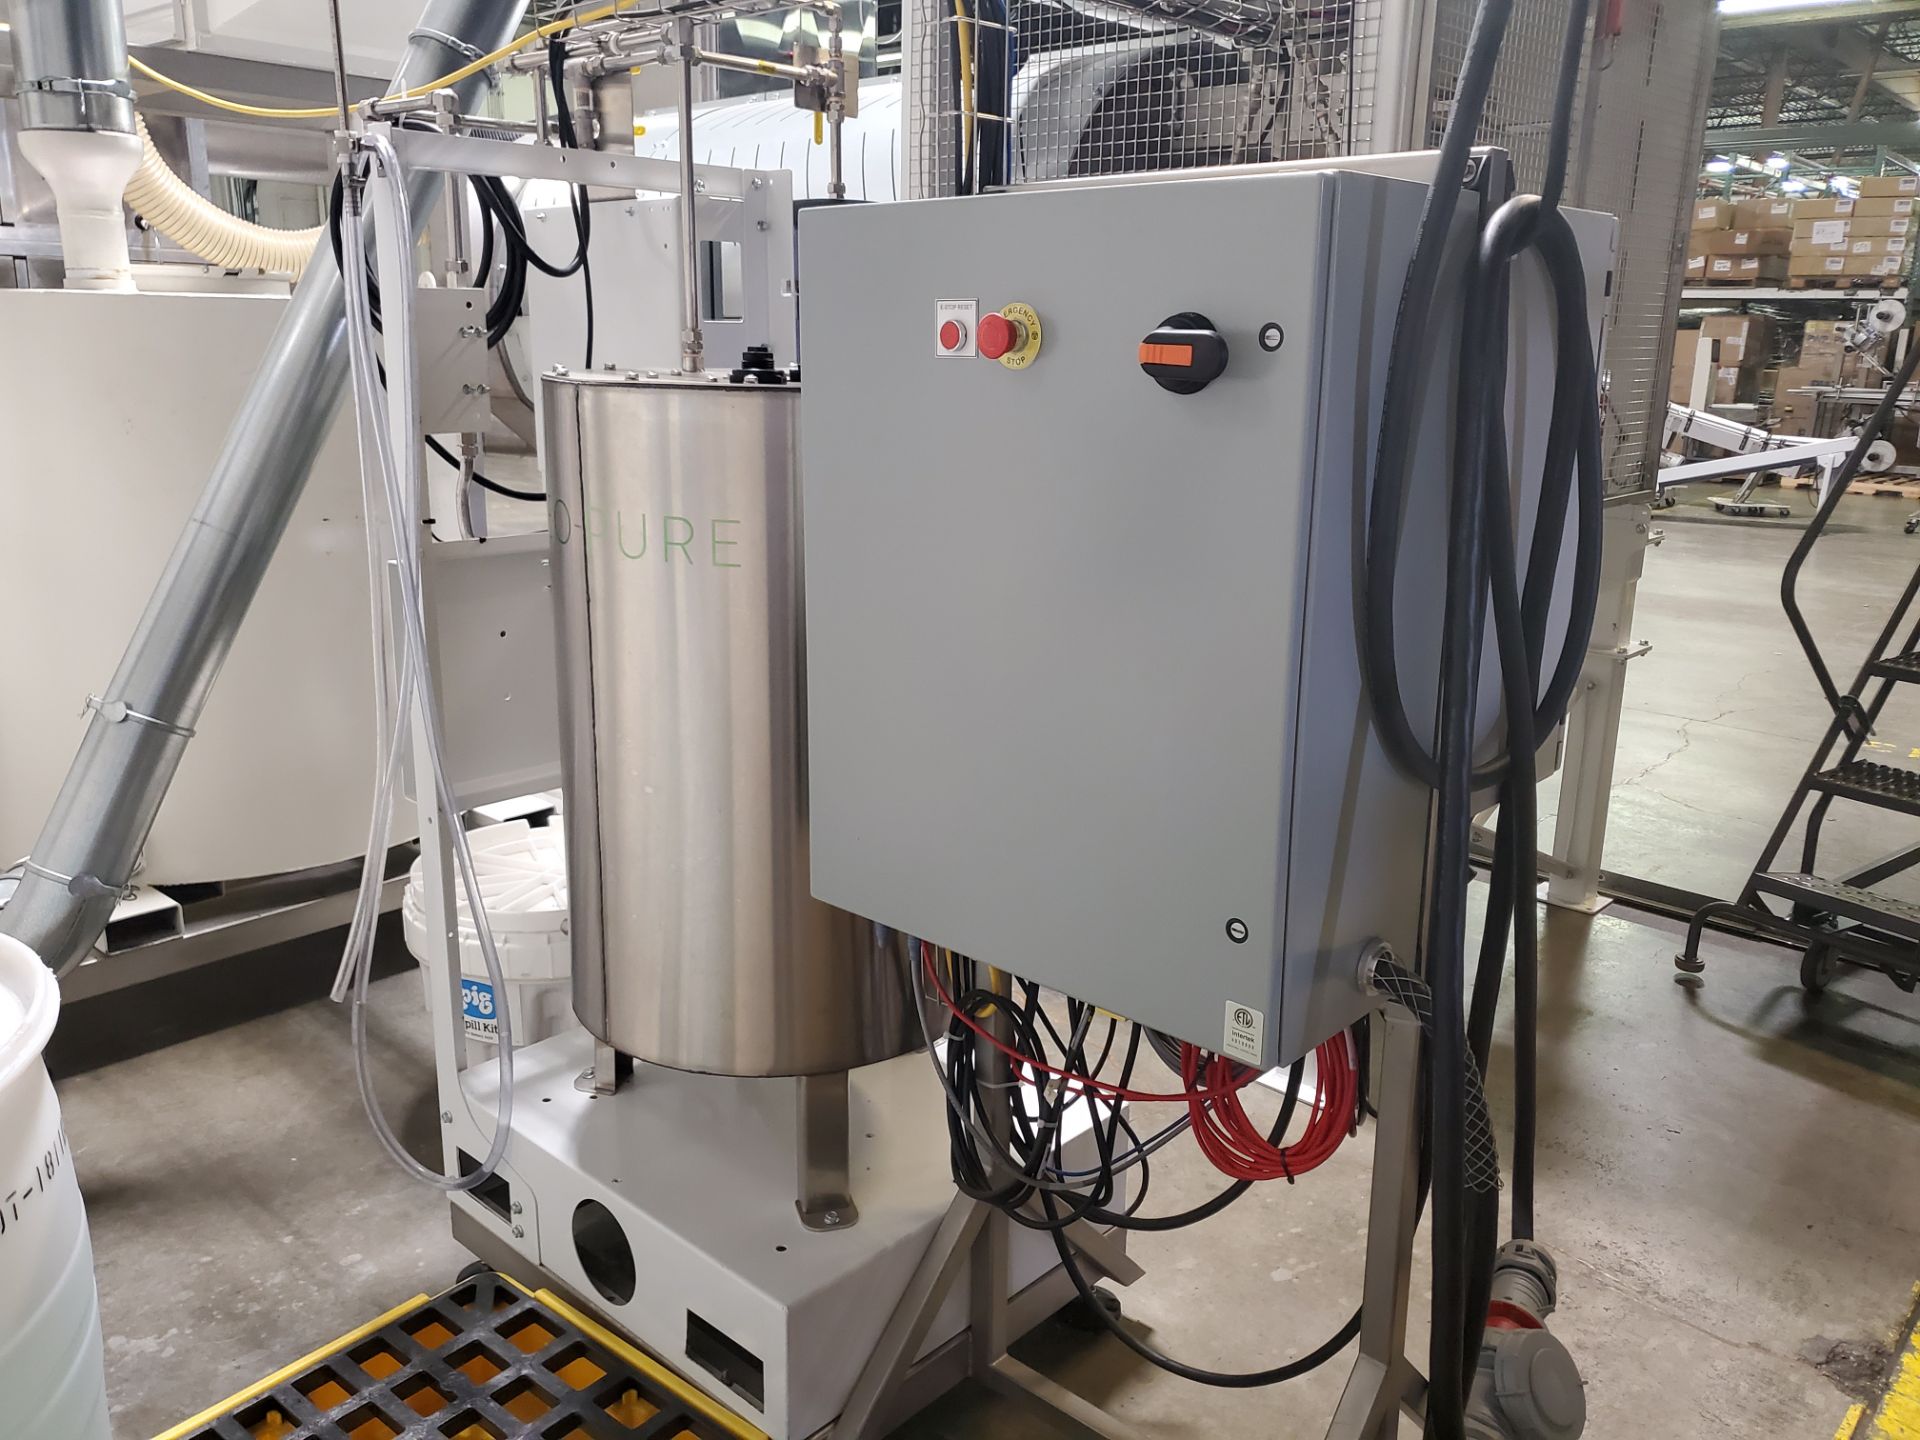 2018 Neo-Pure Seed, Nut, Grain & Hemp Pasteurizing and Drying System, Includes Neo-Pure Batch - Image 15 of 108